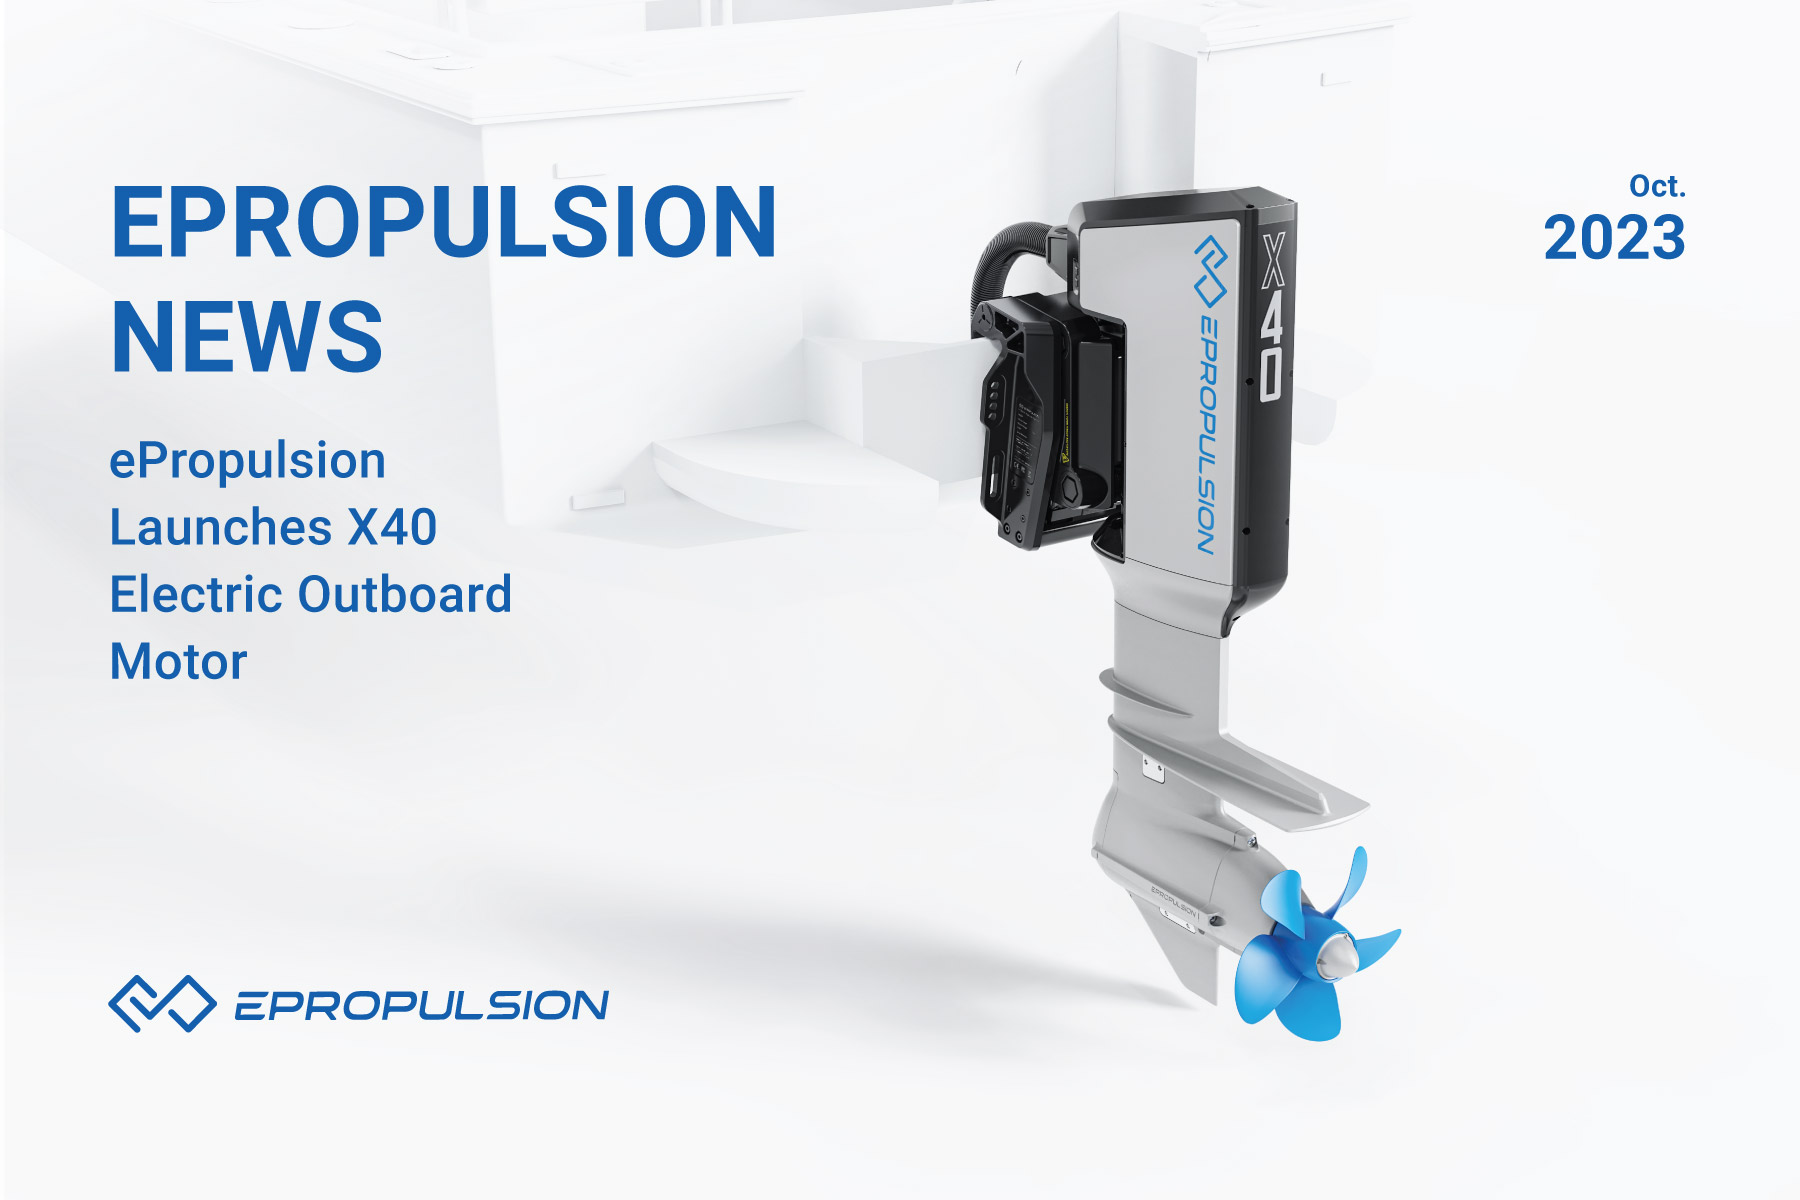 ePropulsion launches X40 outboard motor